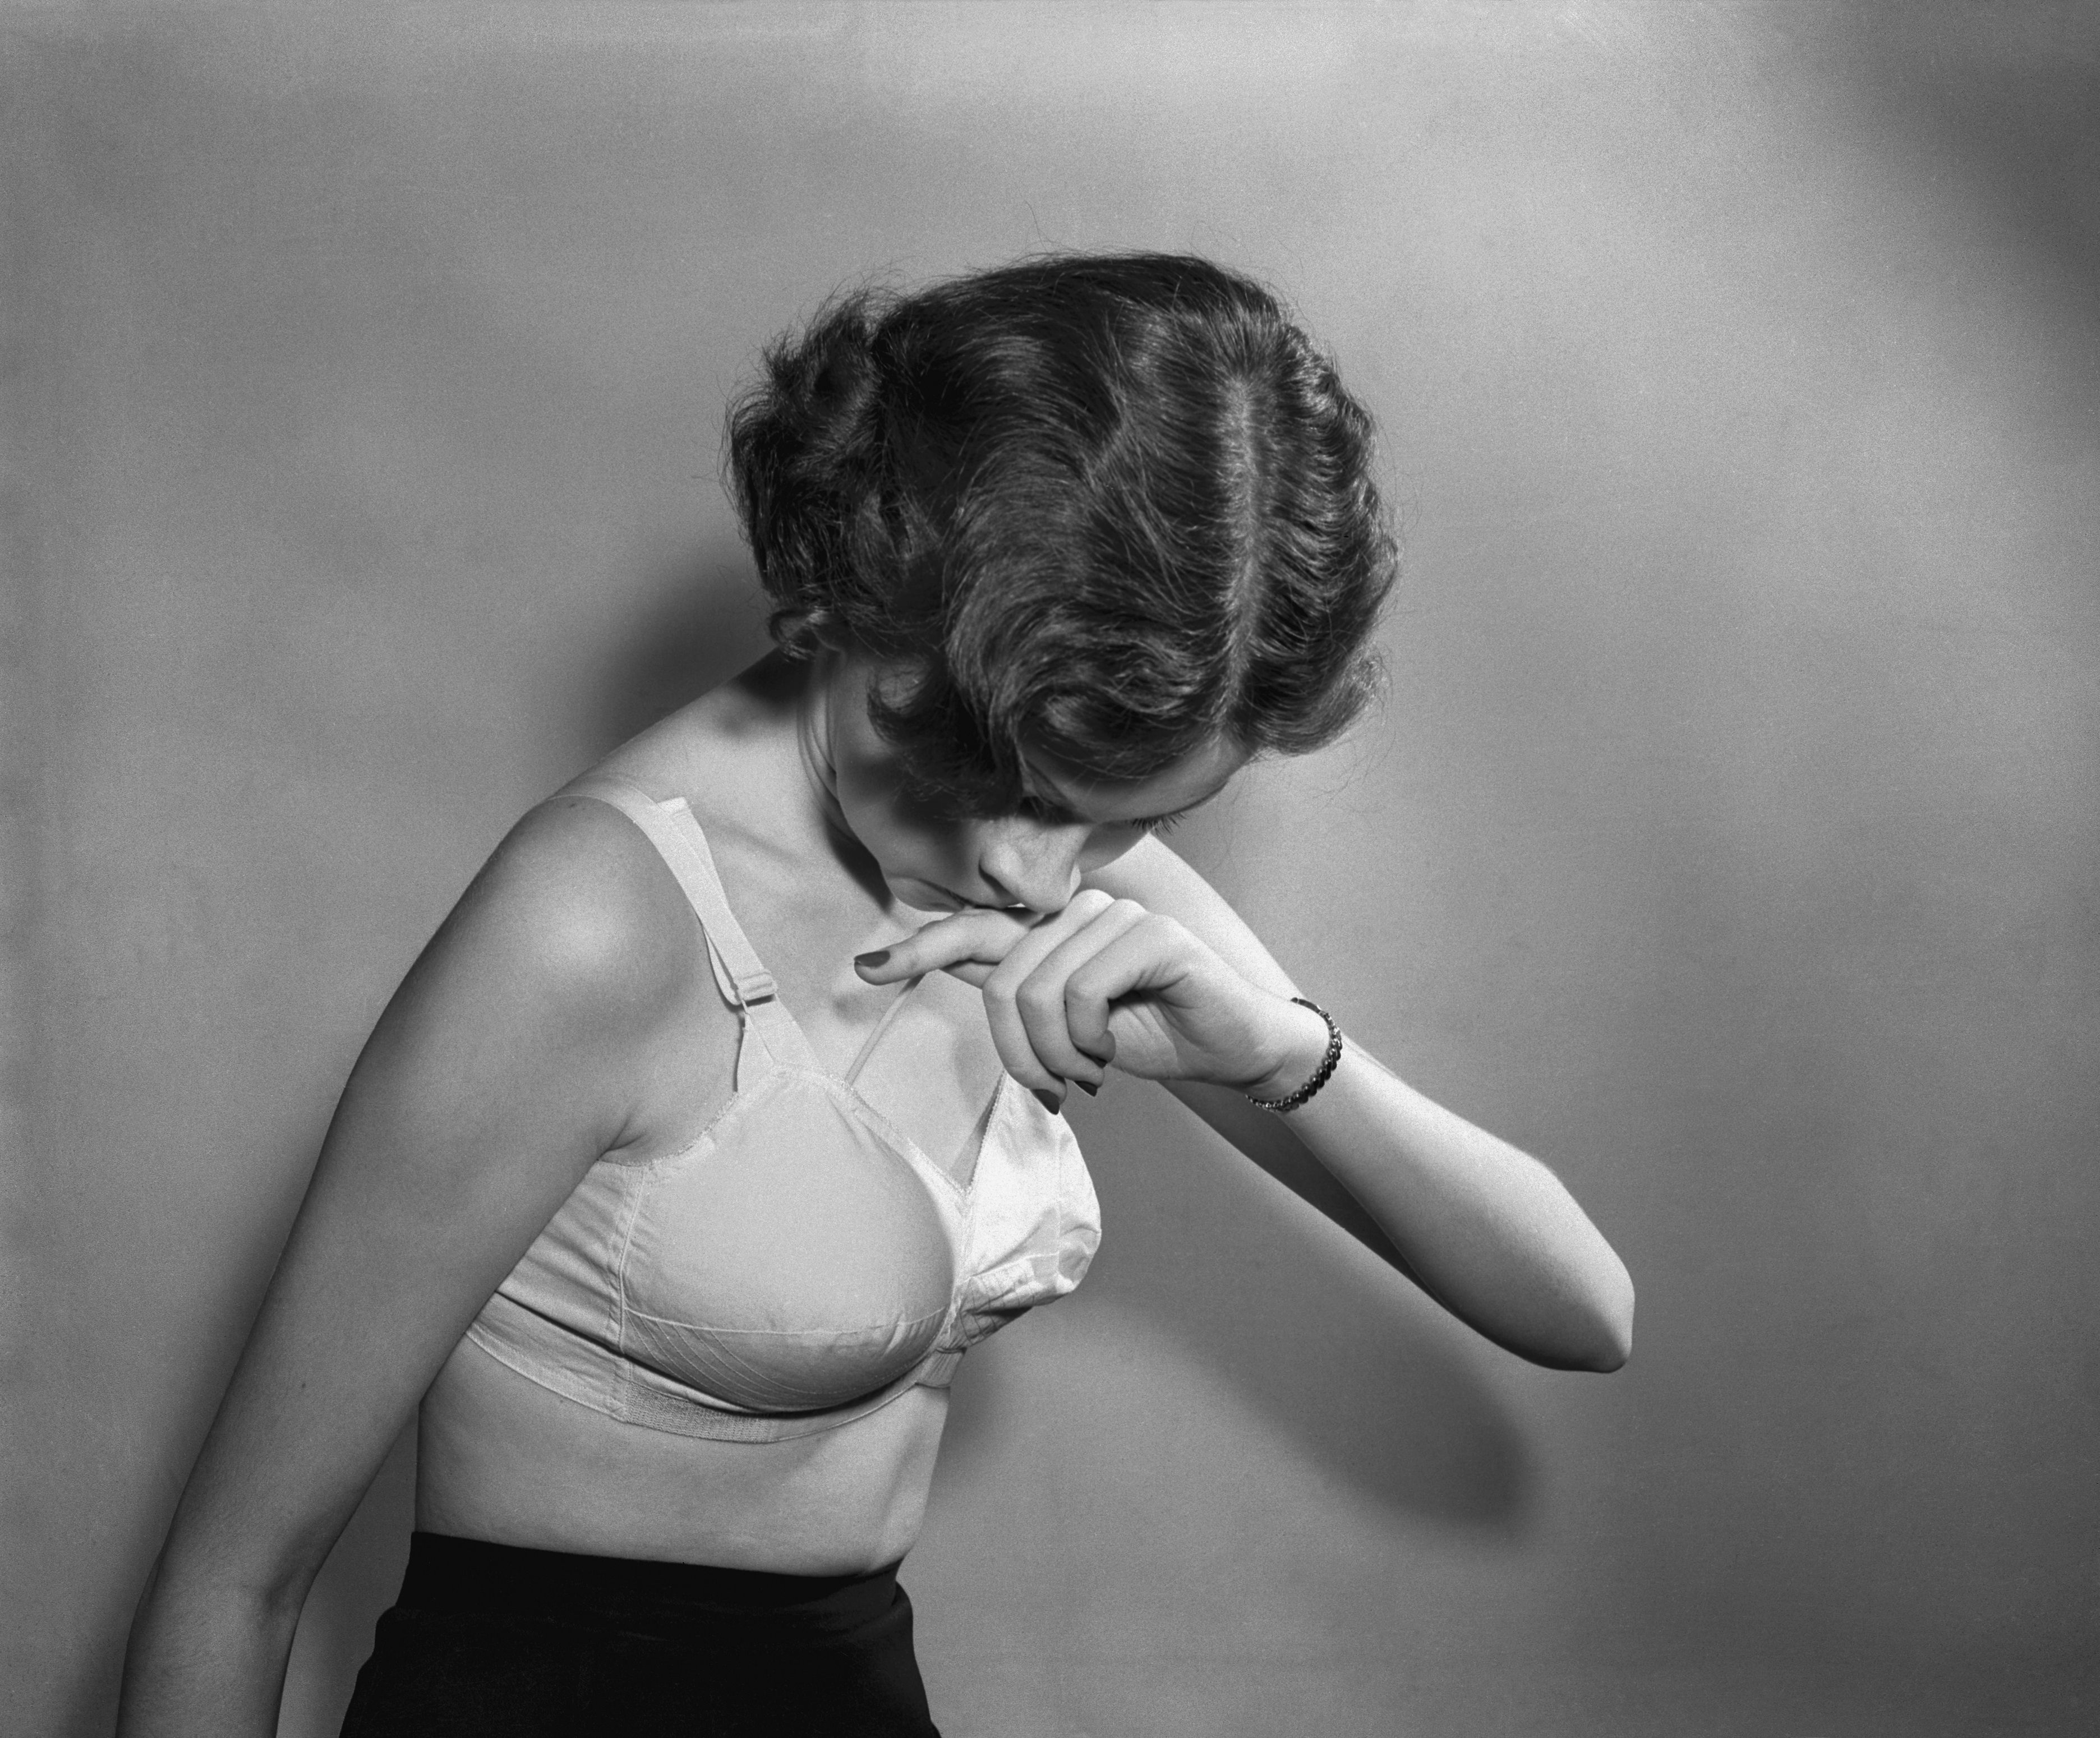 The History of the Bra - When Was the Bra Invented?